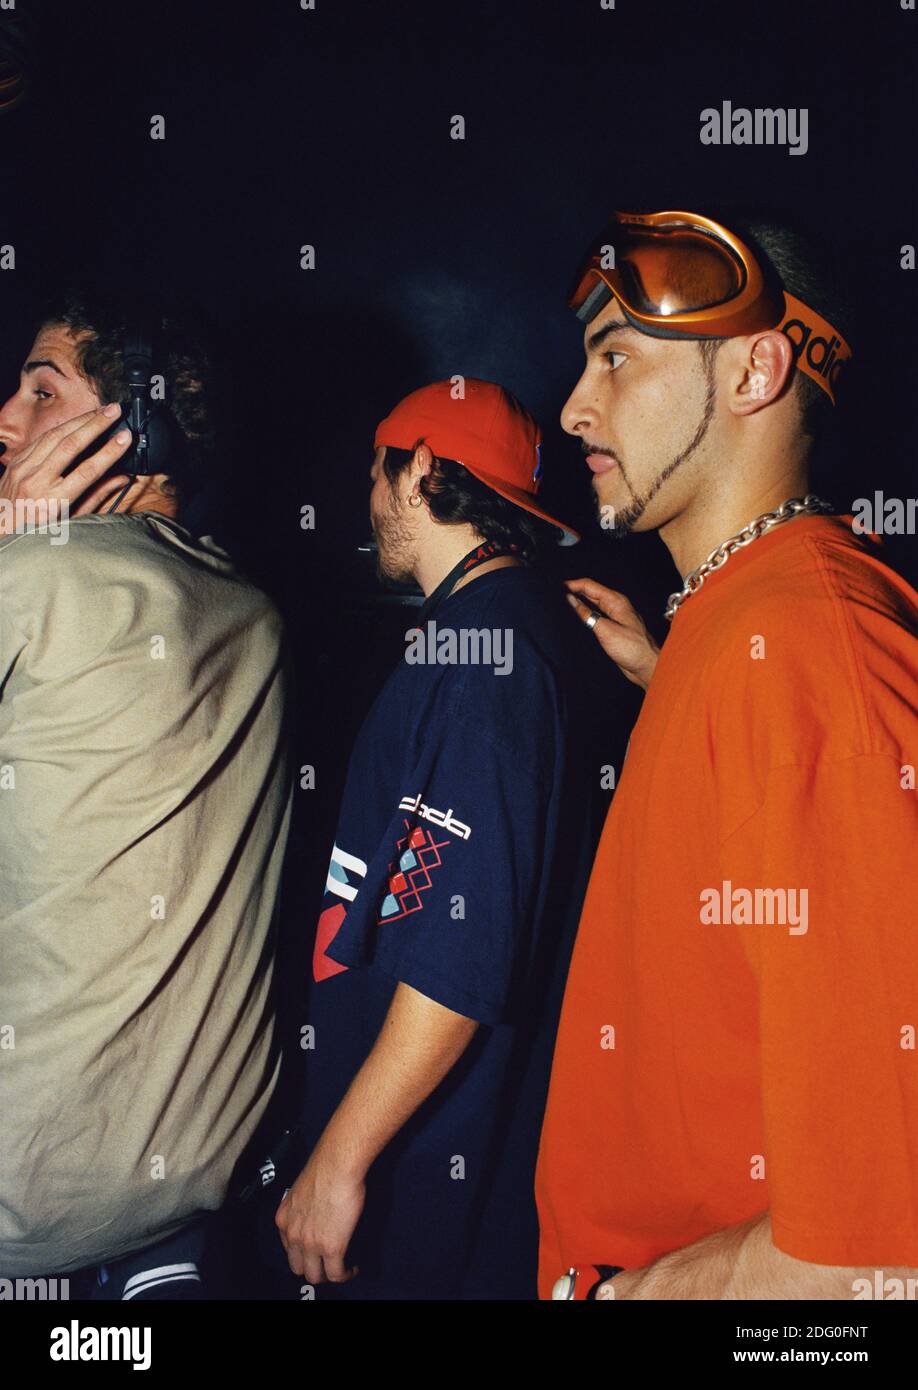 Thomas Bangalter (left) and Guy-Manuel de Homem-Christo (center) of Daft Punk, with Armand van Helden (right) at the Winter Music Conference in Miami, Florida. March 16, 1999. Stock Photo